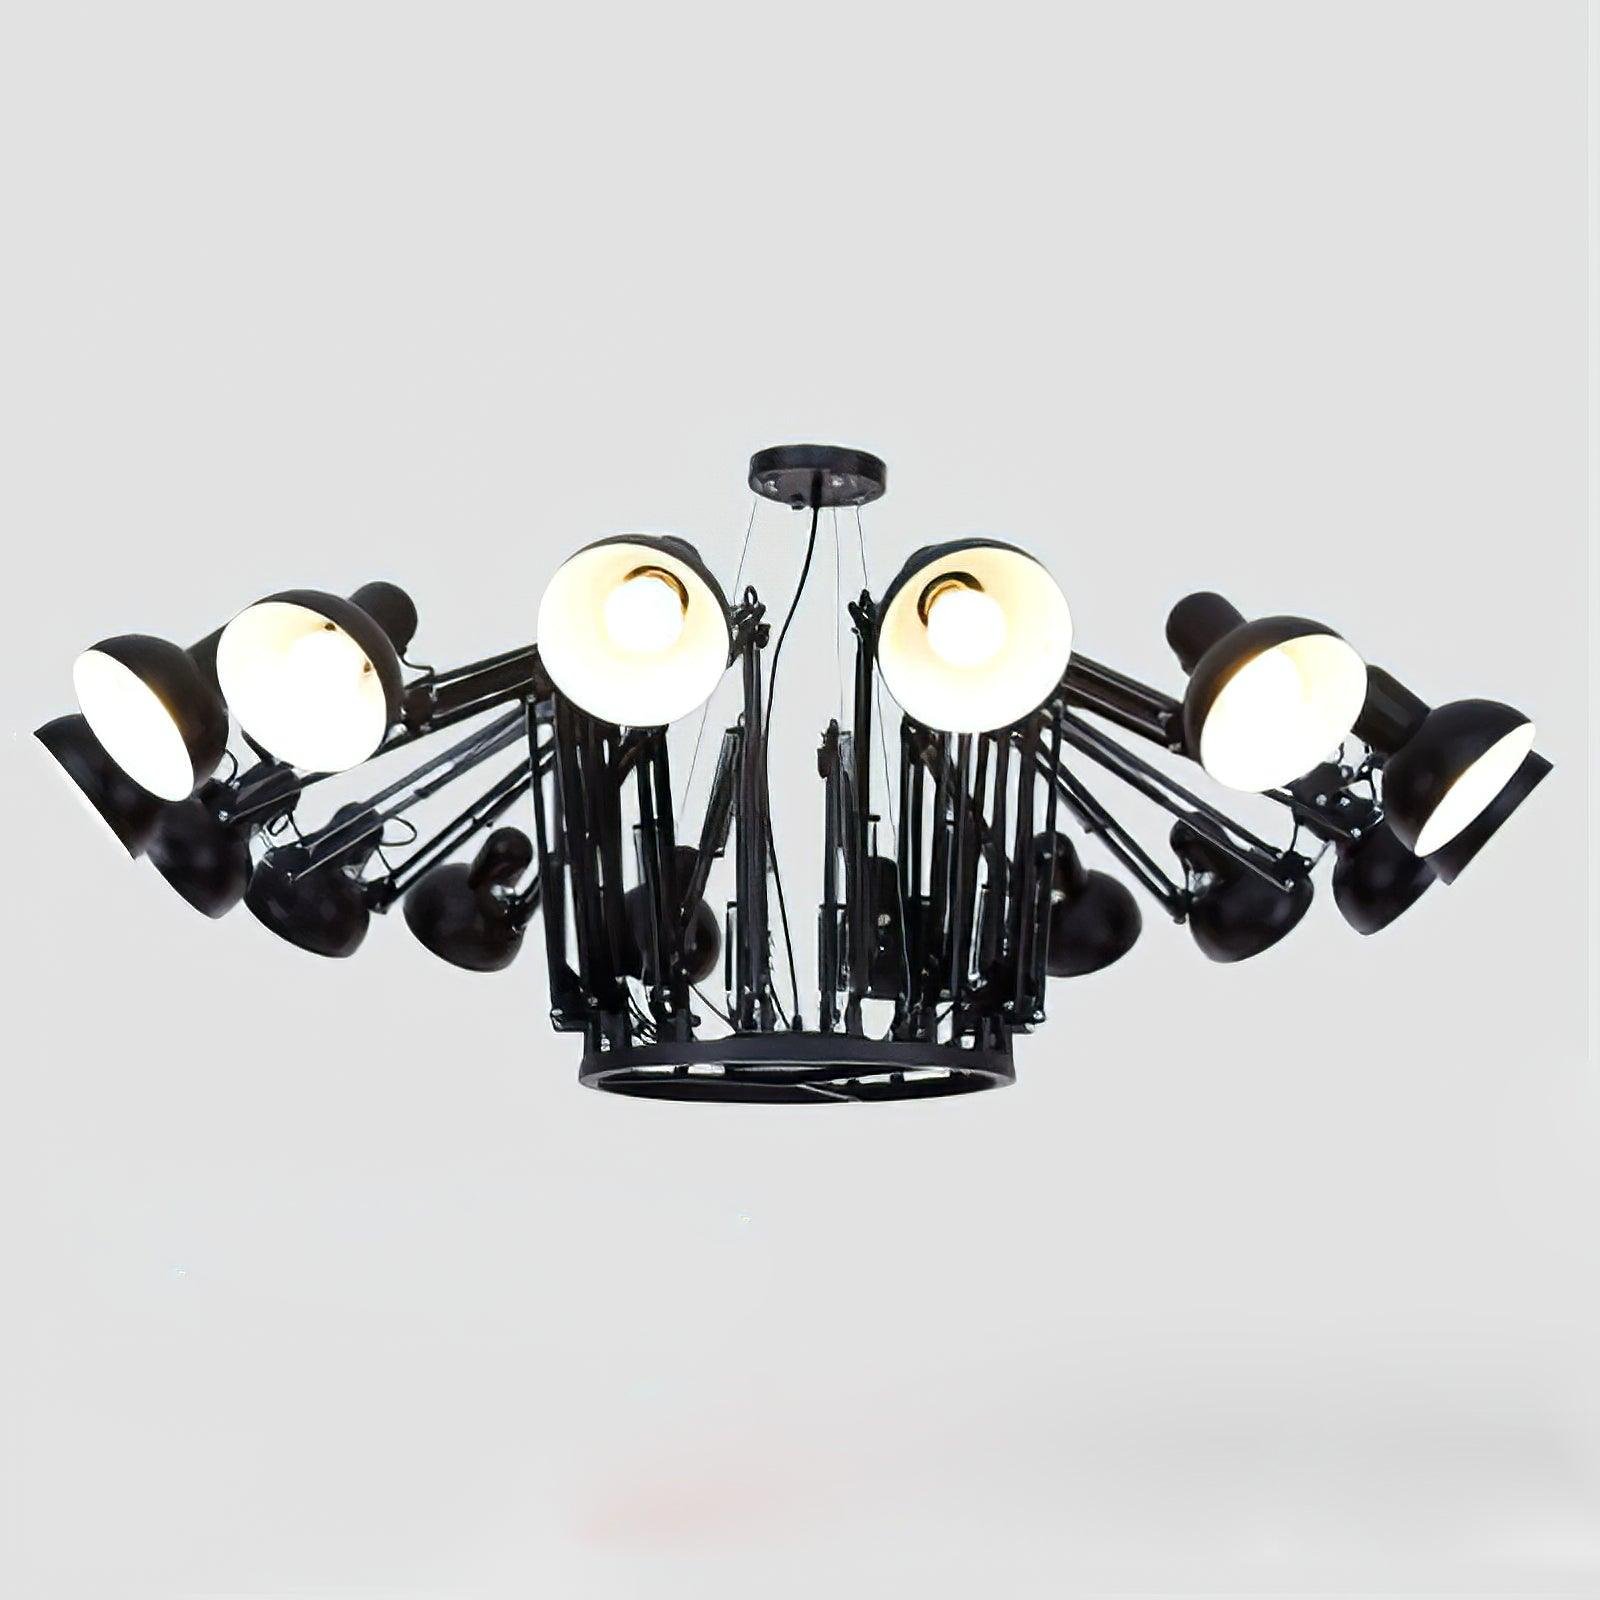 16-head Dear Ingo Chandeliers: Diameter 82 inches, Height 15.7 inches, or Diameter 208cm, Height 40cm, in Black.